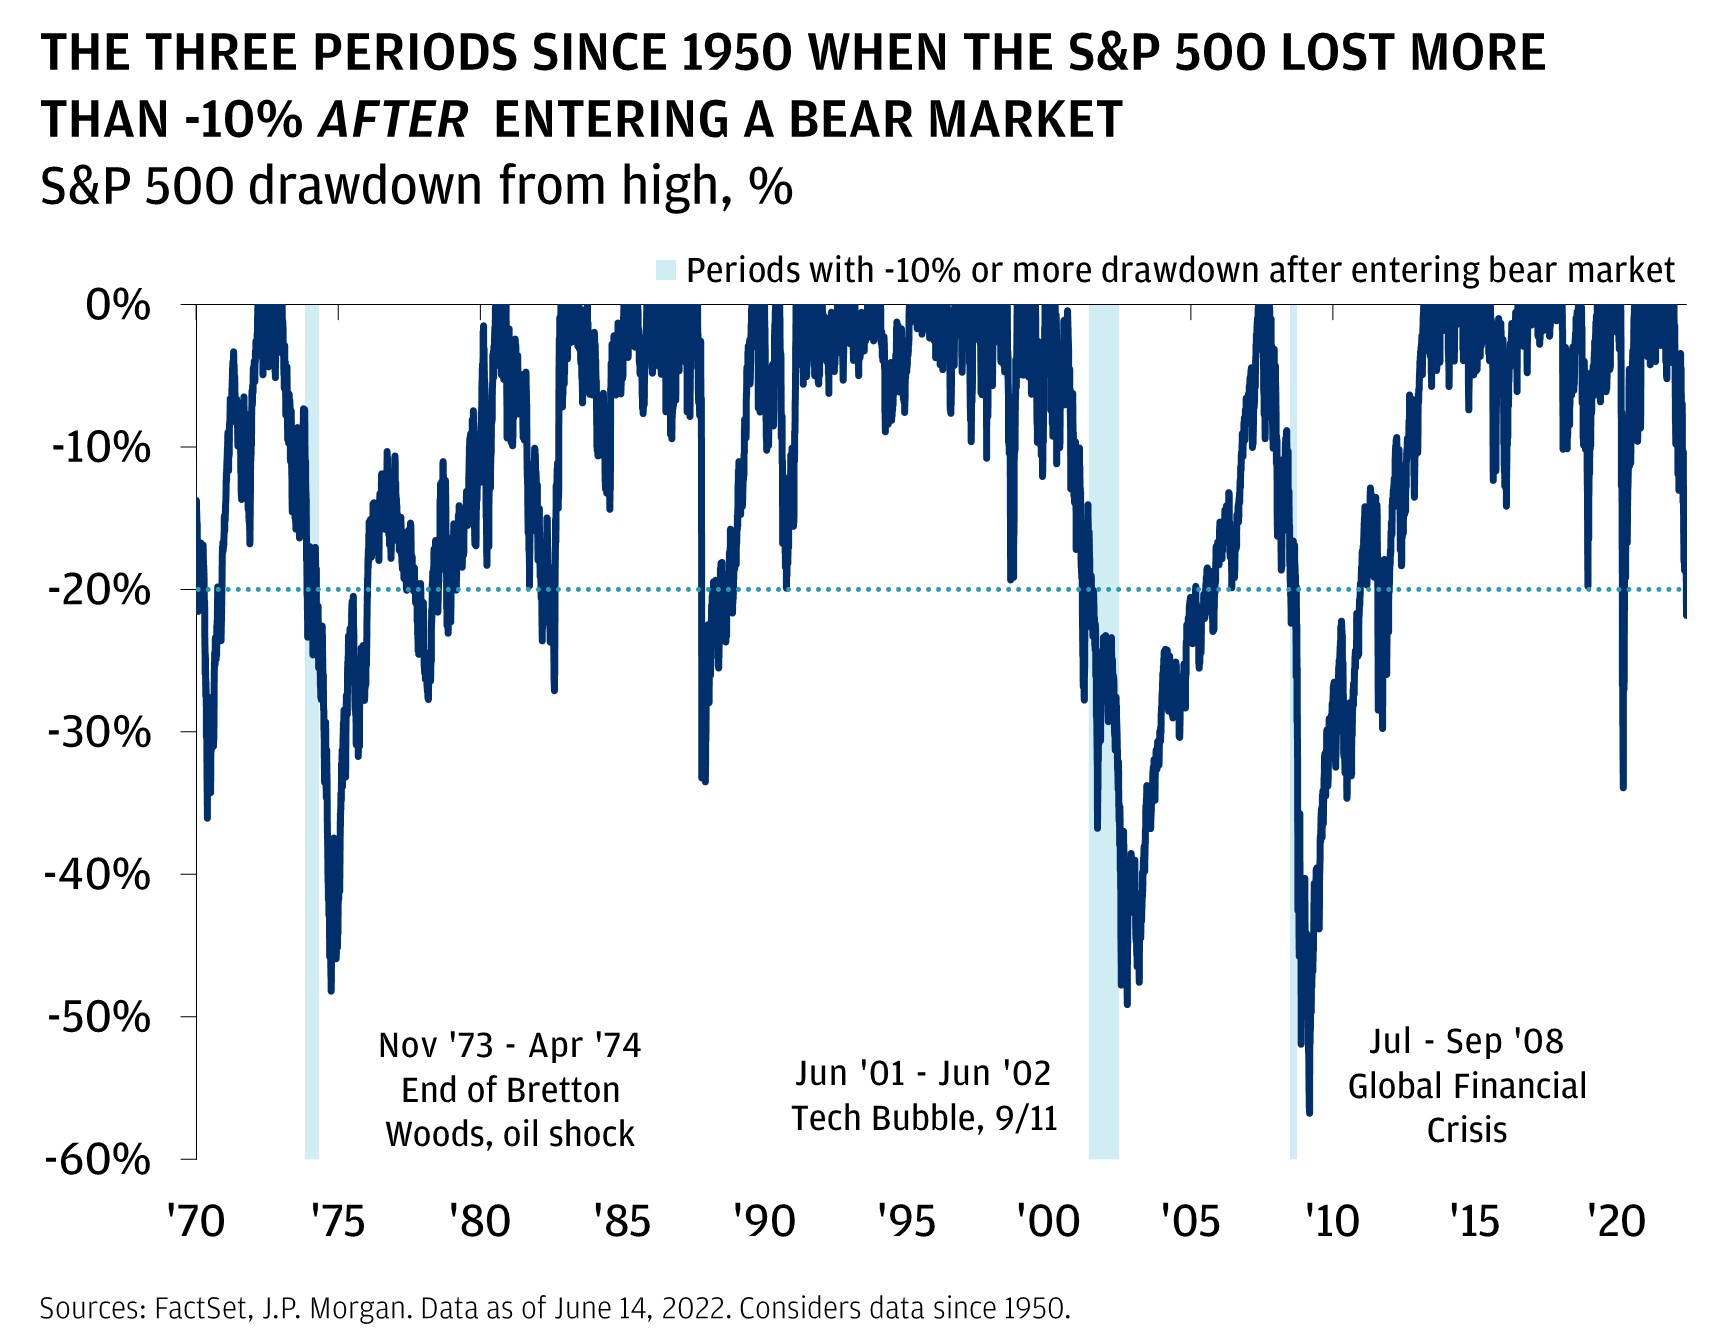 This chart shows the S&P 500 drawdowns from all-time highs, from January 1990 until June 2022.